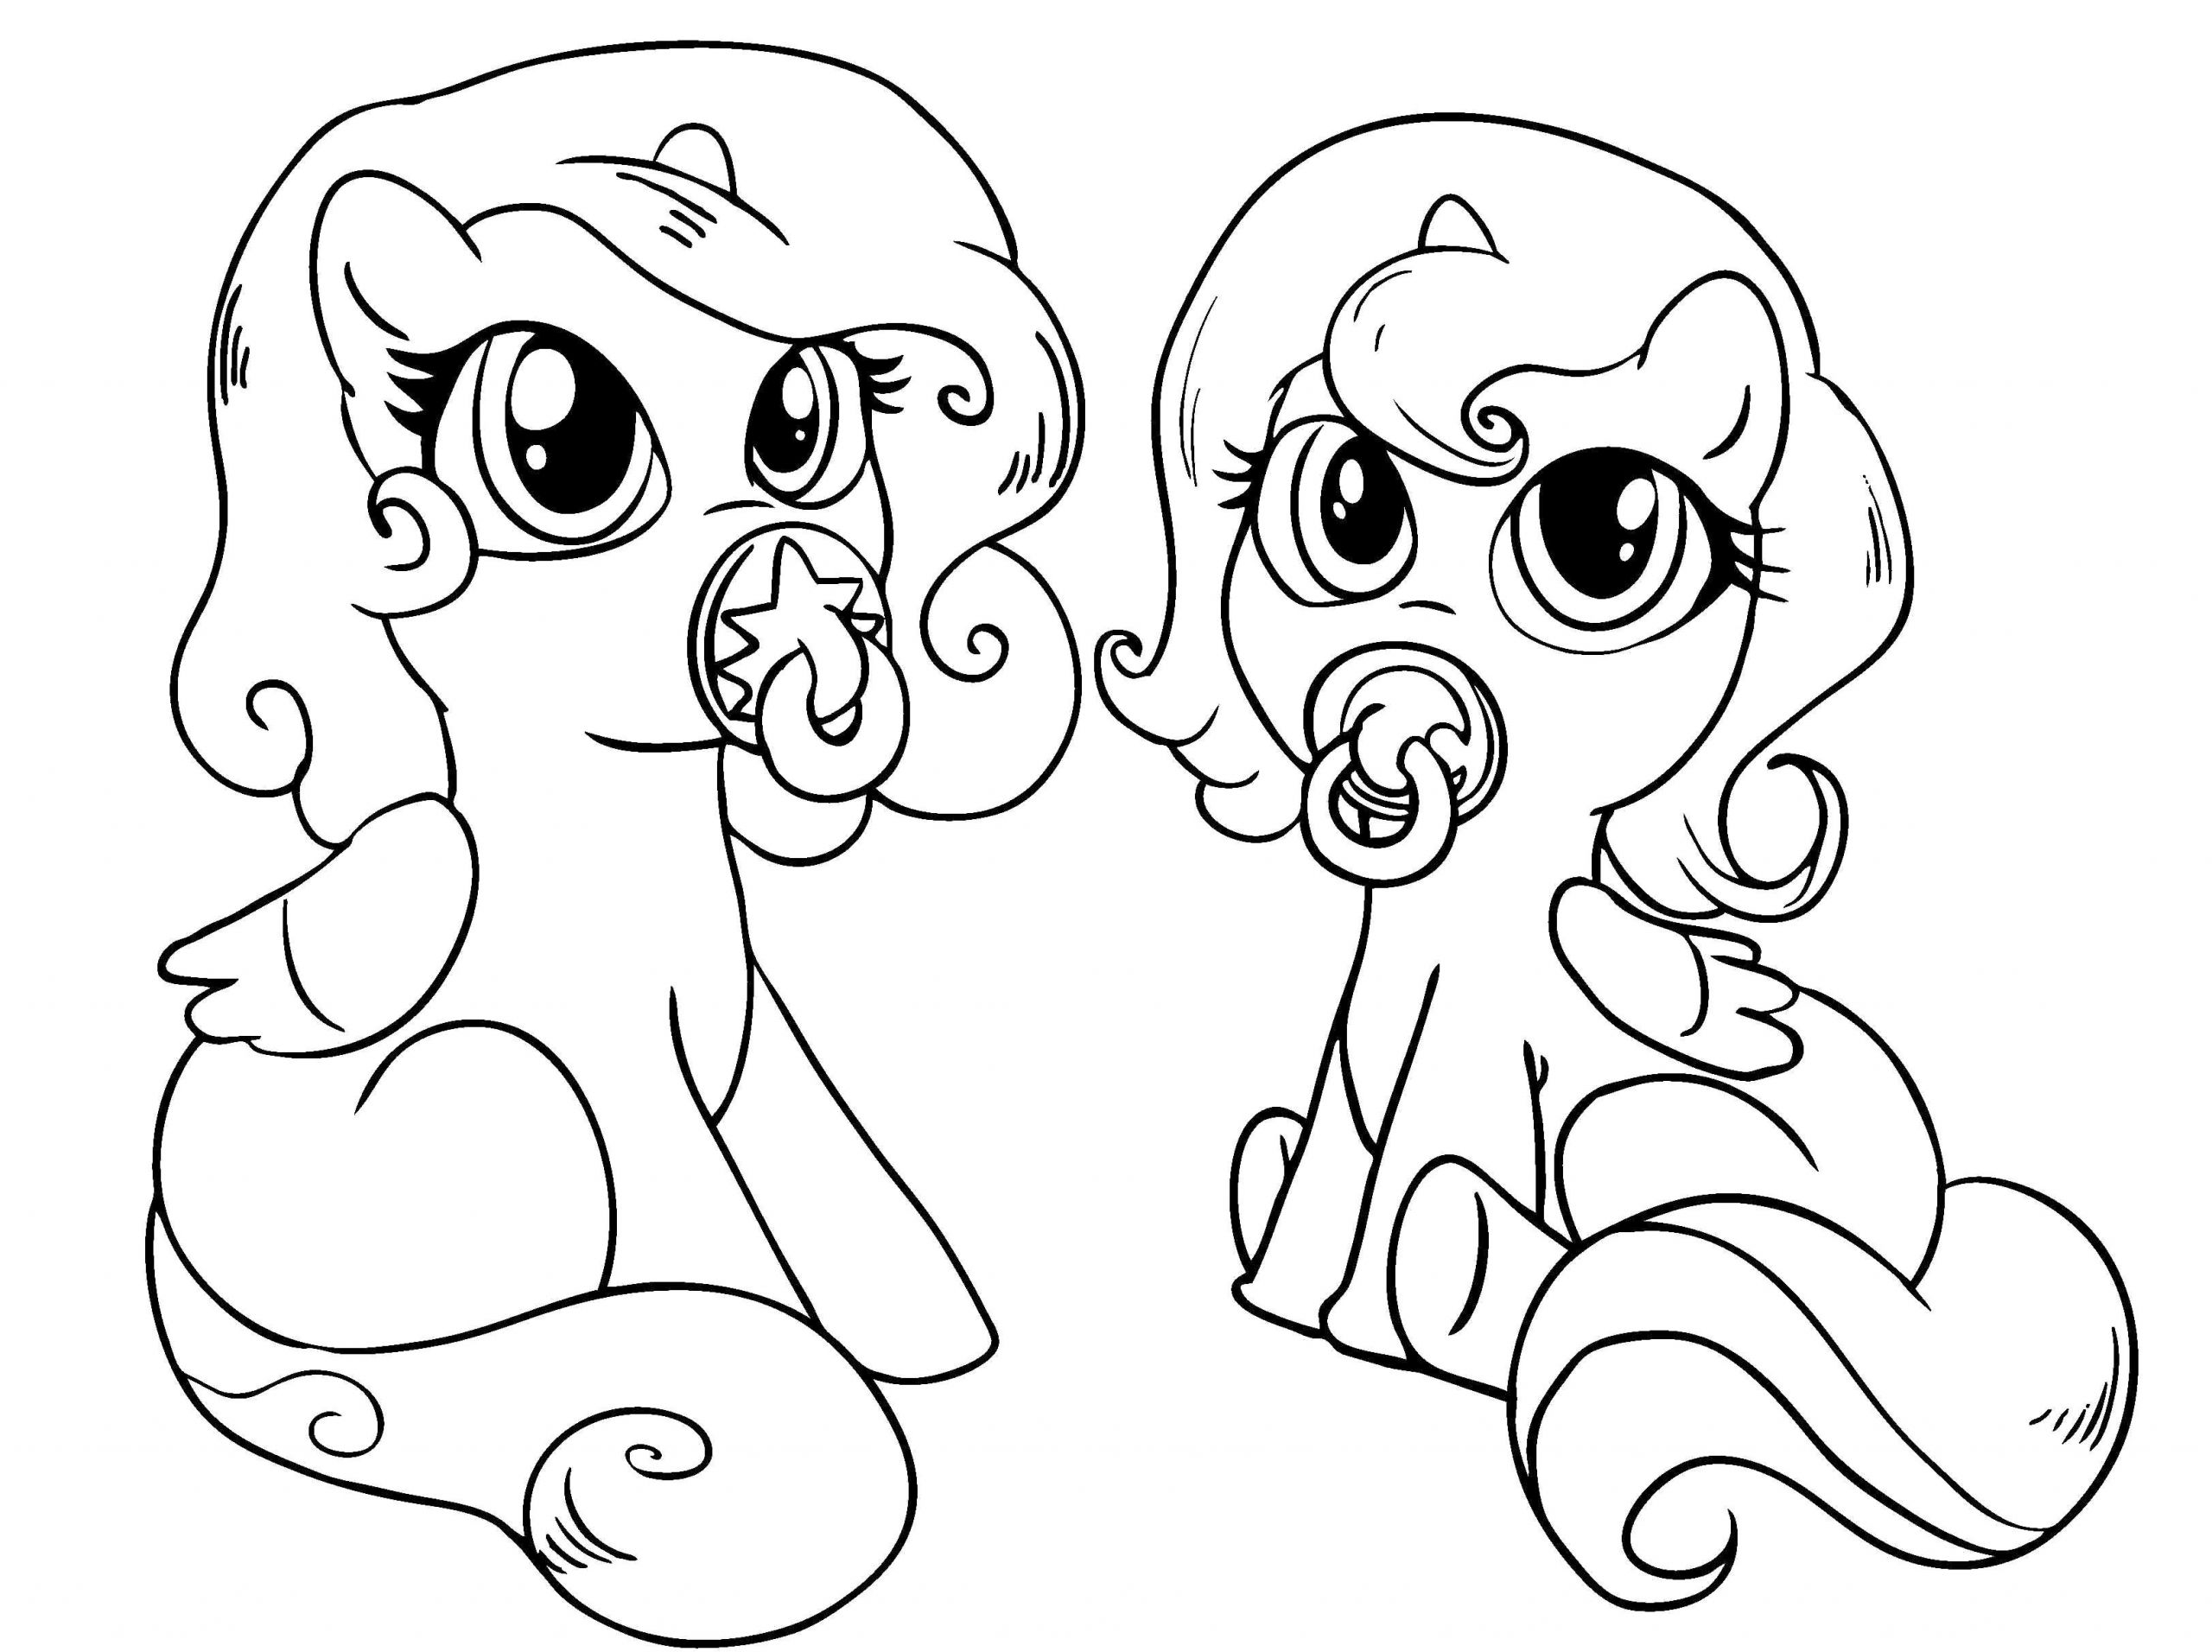 Baby My Little Pony Coloring Pages
 Baby Little Pony Coloring Pages My Little Pony car